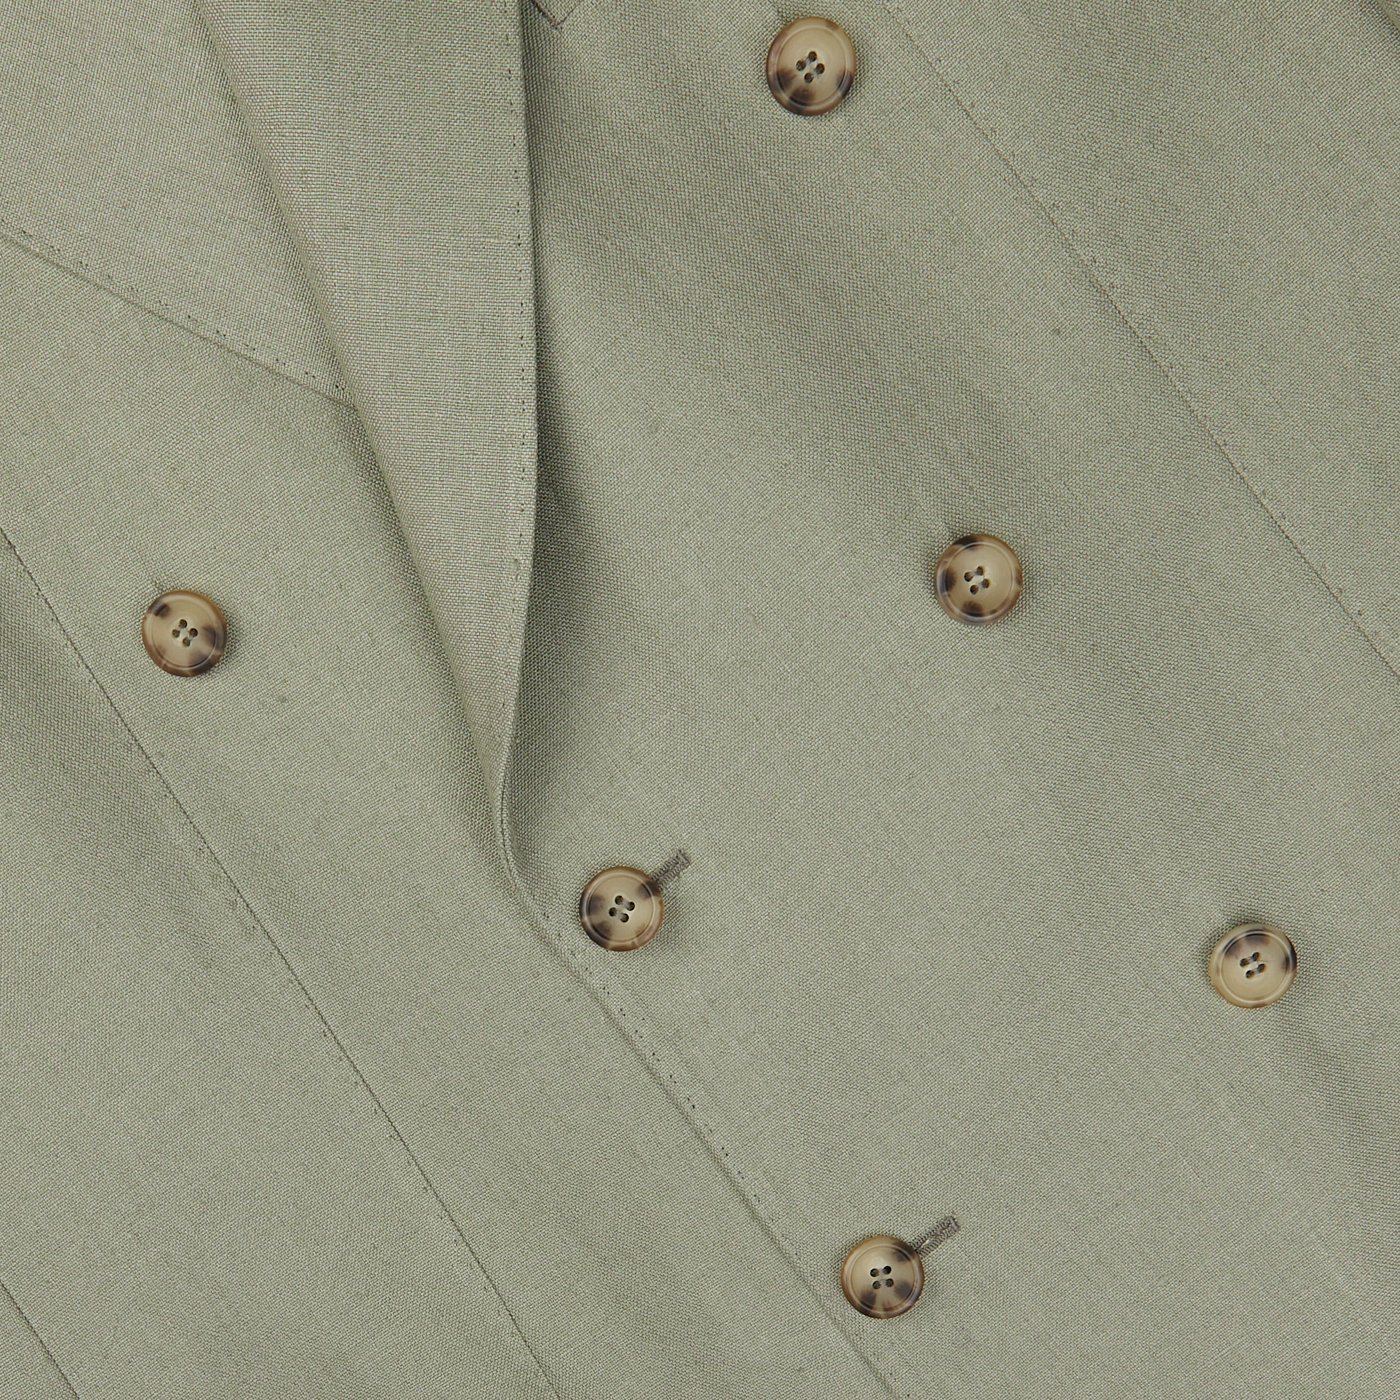 Close-up of a sage green, Studio 73 Sage Green Canapa Hemp DB Suit with tan buttons arranged in two parallel rows. The fabric has a smooth, textured appearance.